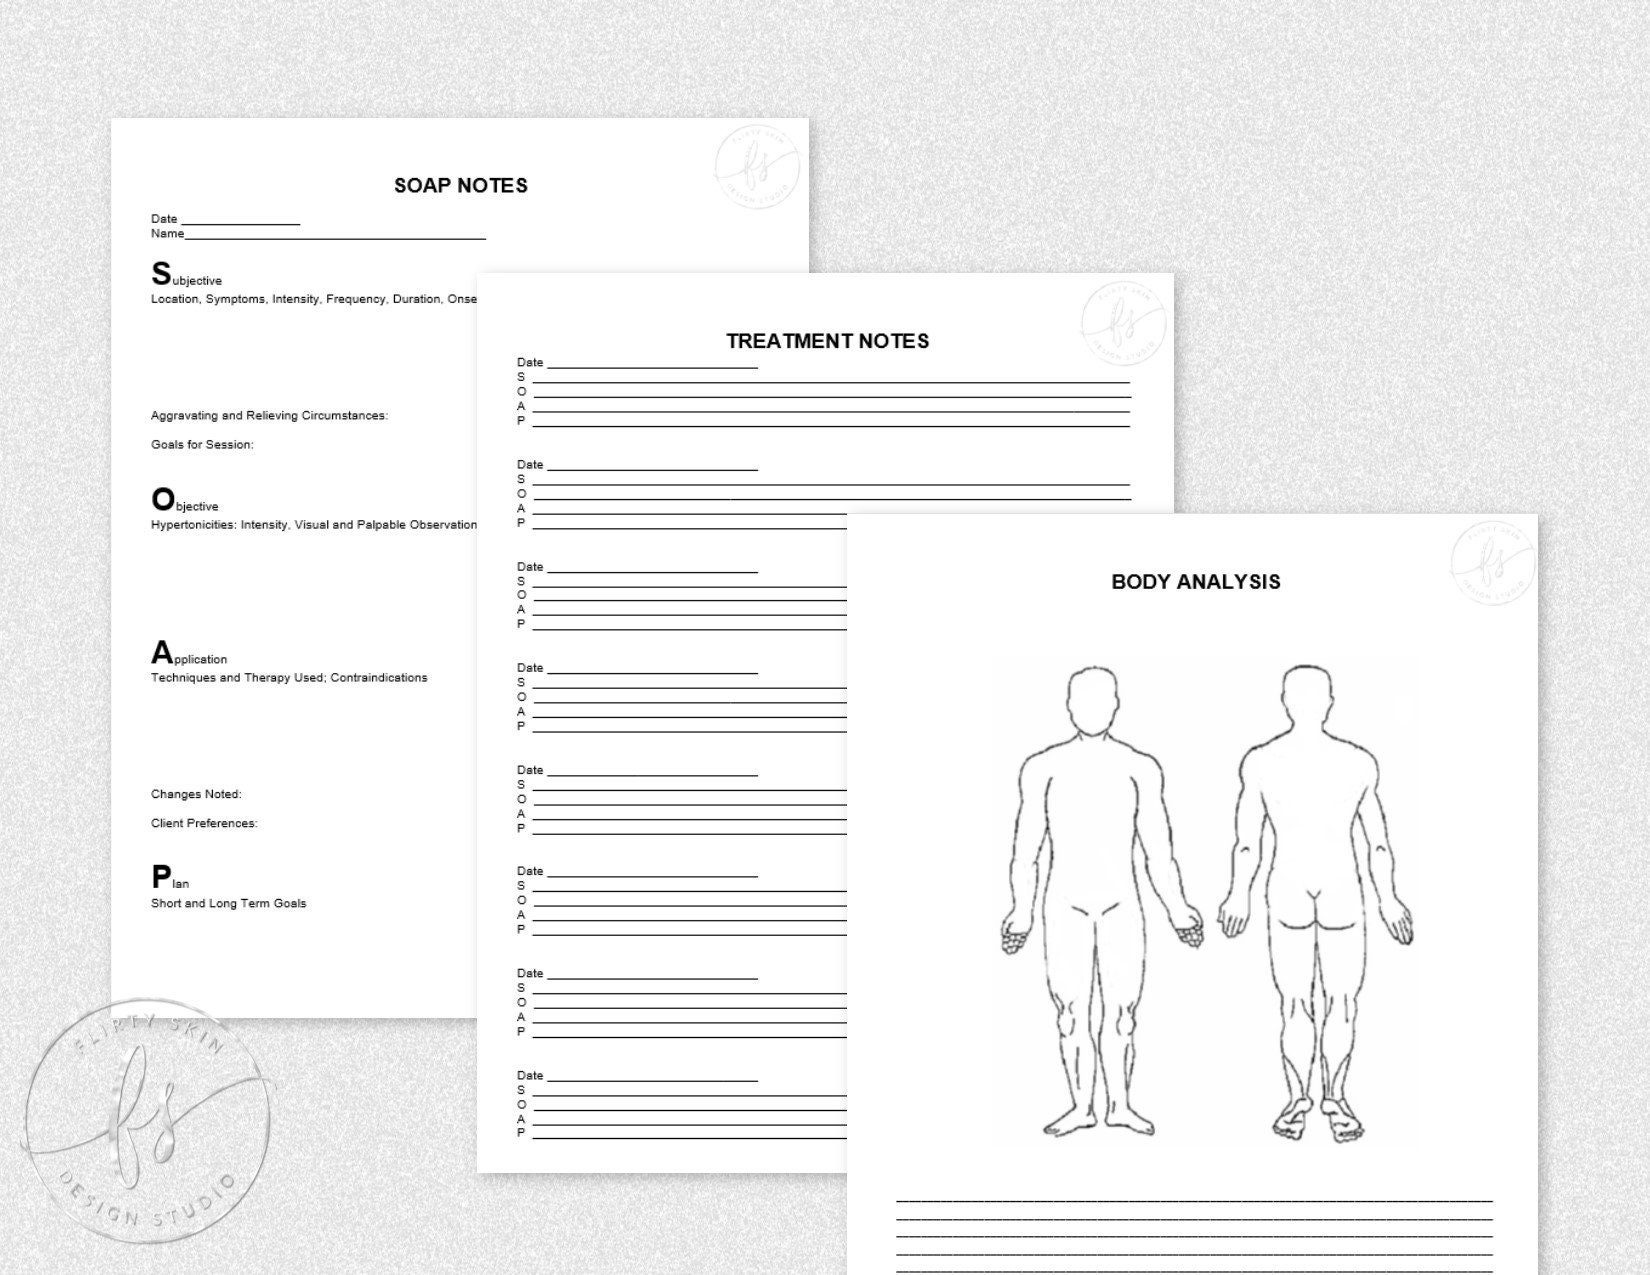 SOAP Notes Form  Massage Therapist  Spa  Medical Spa  Day Spa  Client  Form  Client Note  Business Forms  Editable Forms For Free Soap Notes For Massage Therapy Templates